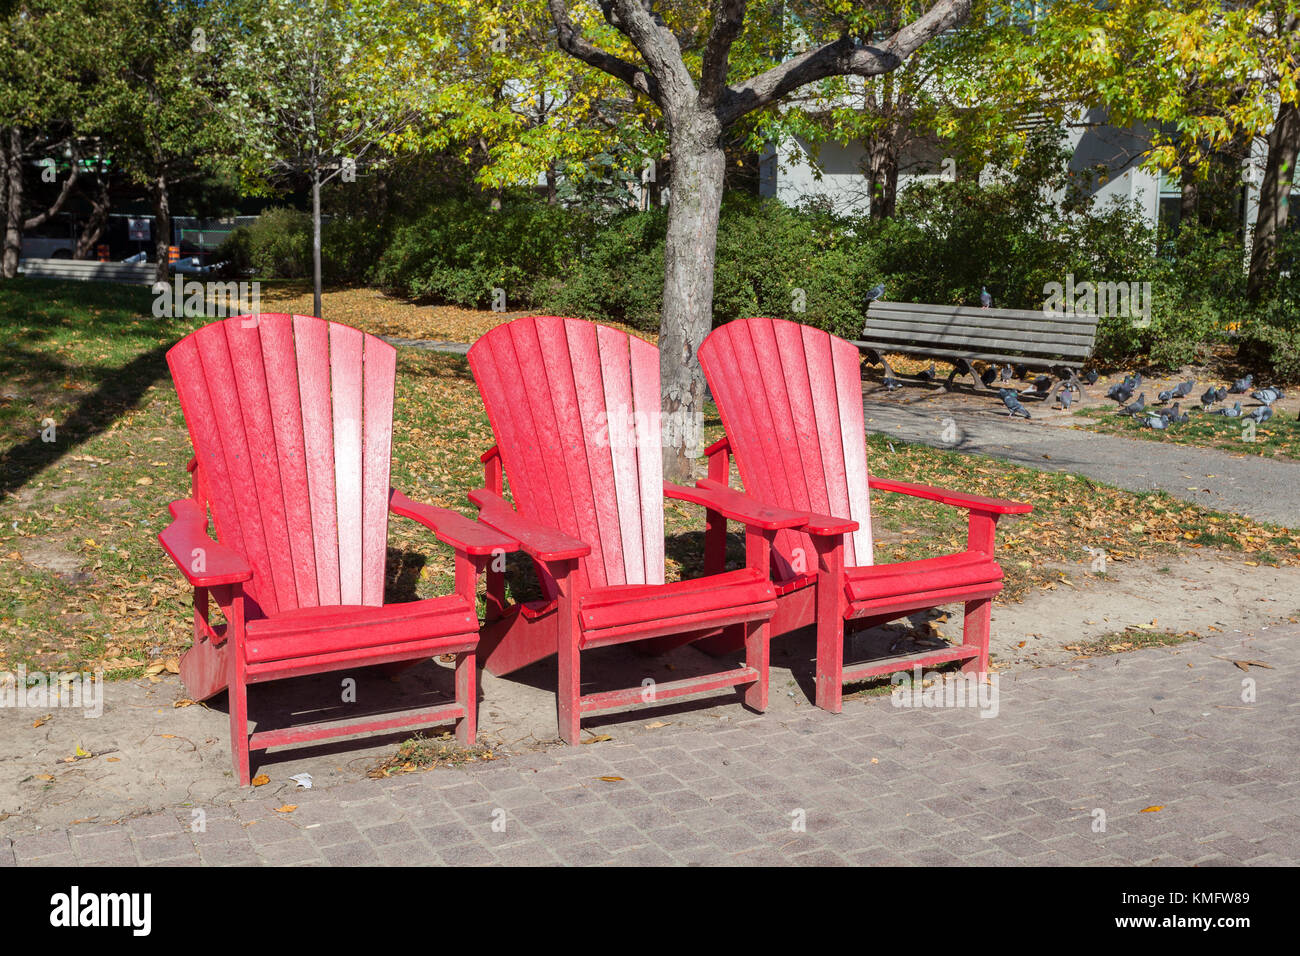 Three empty red chairs in an urban park in Toronto, Canada Stock Photo